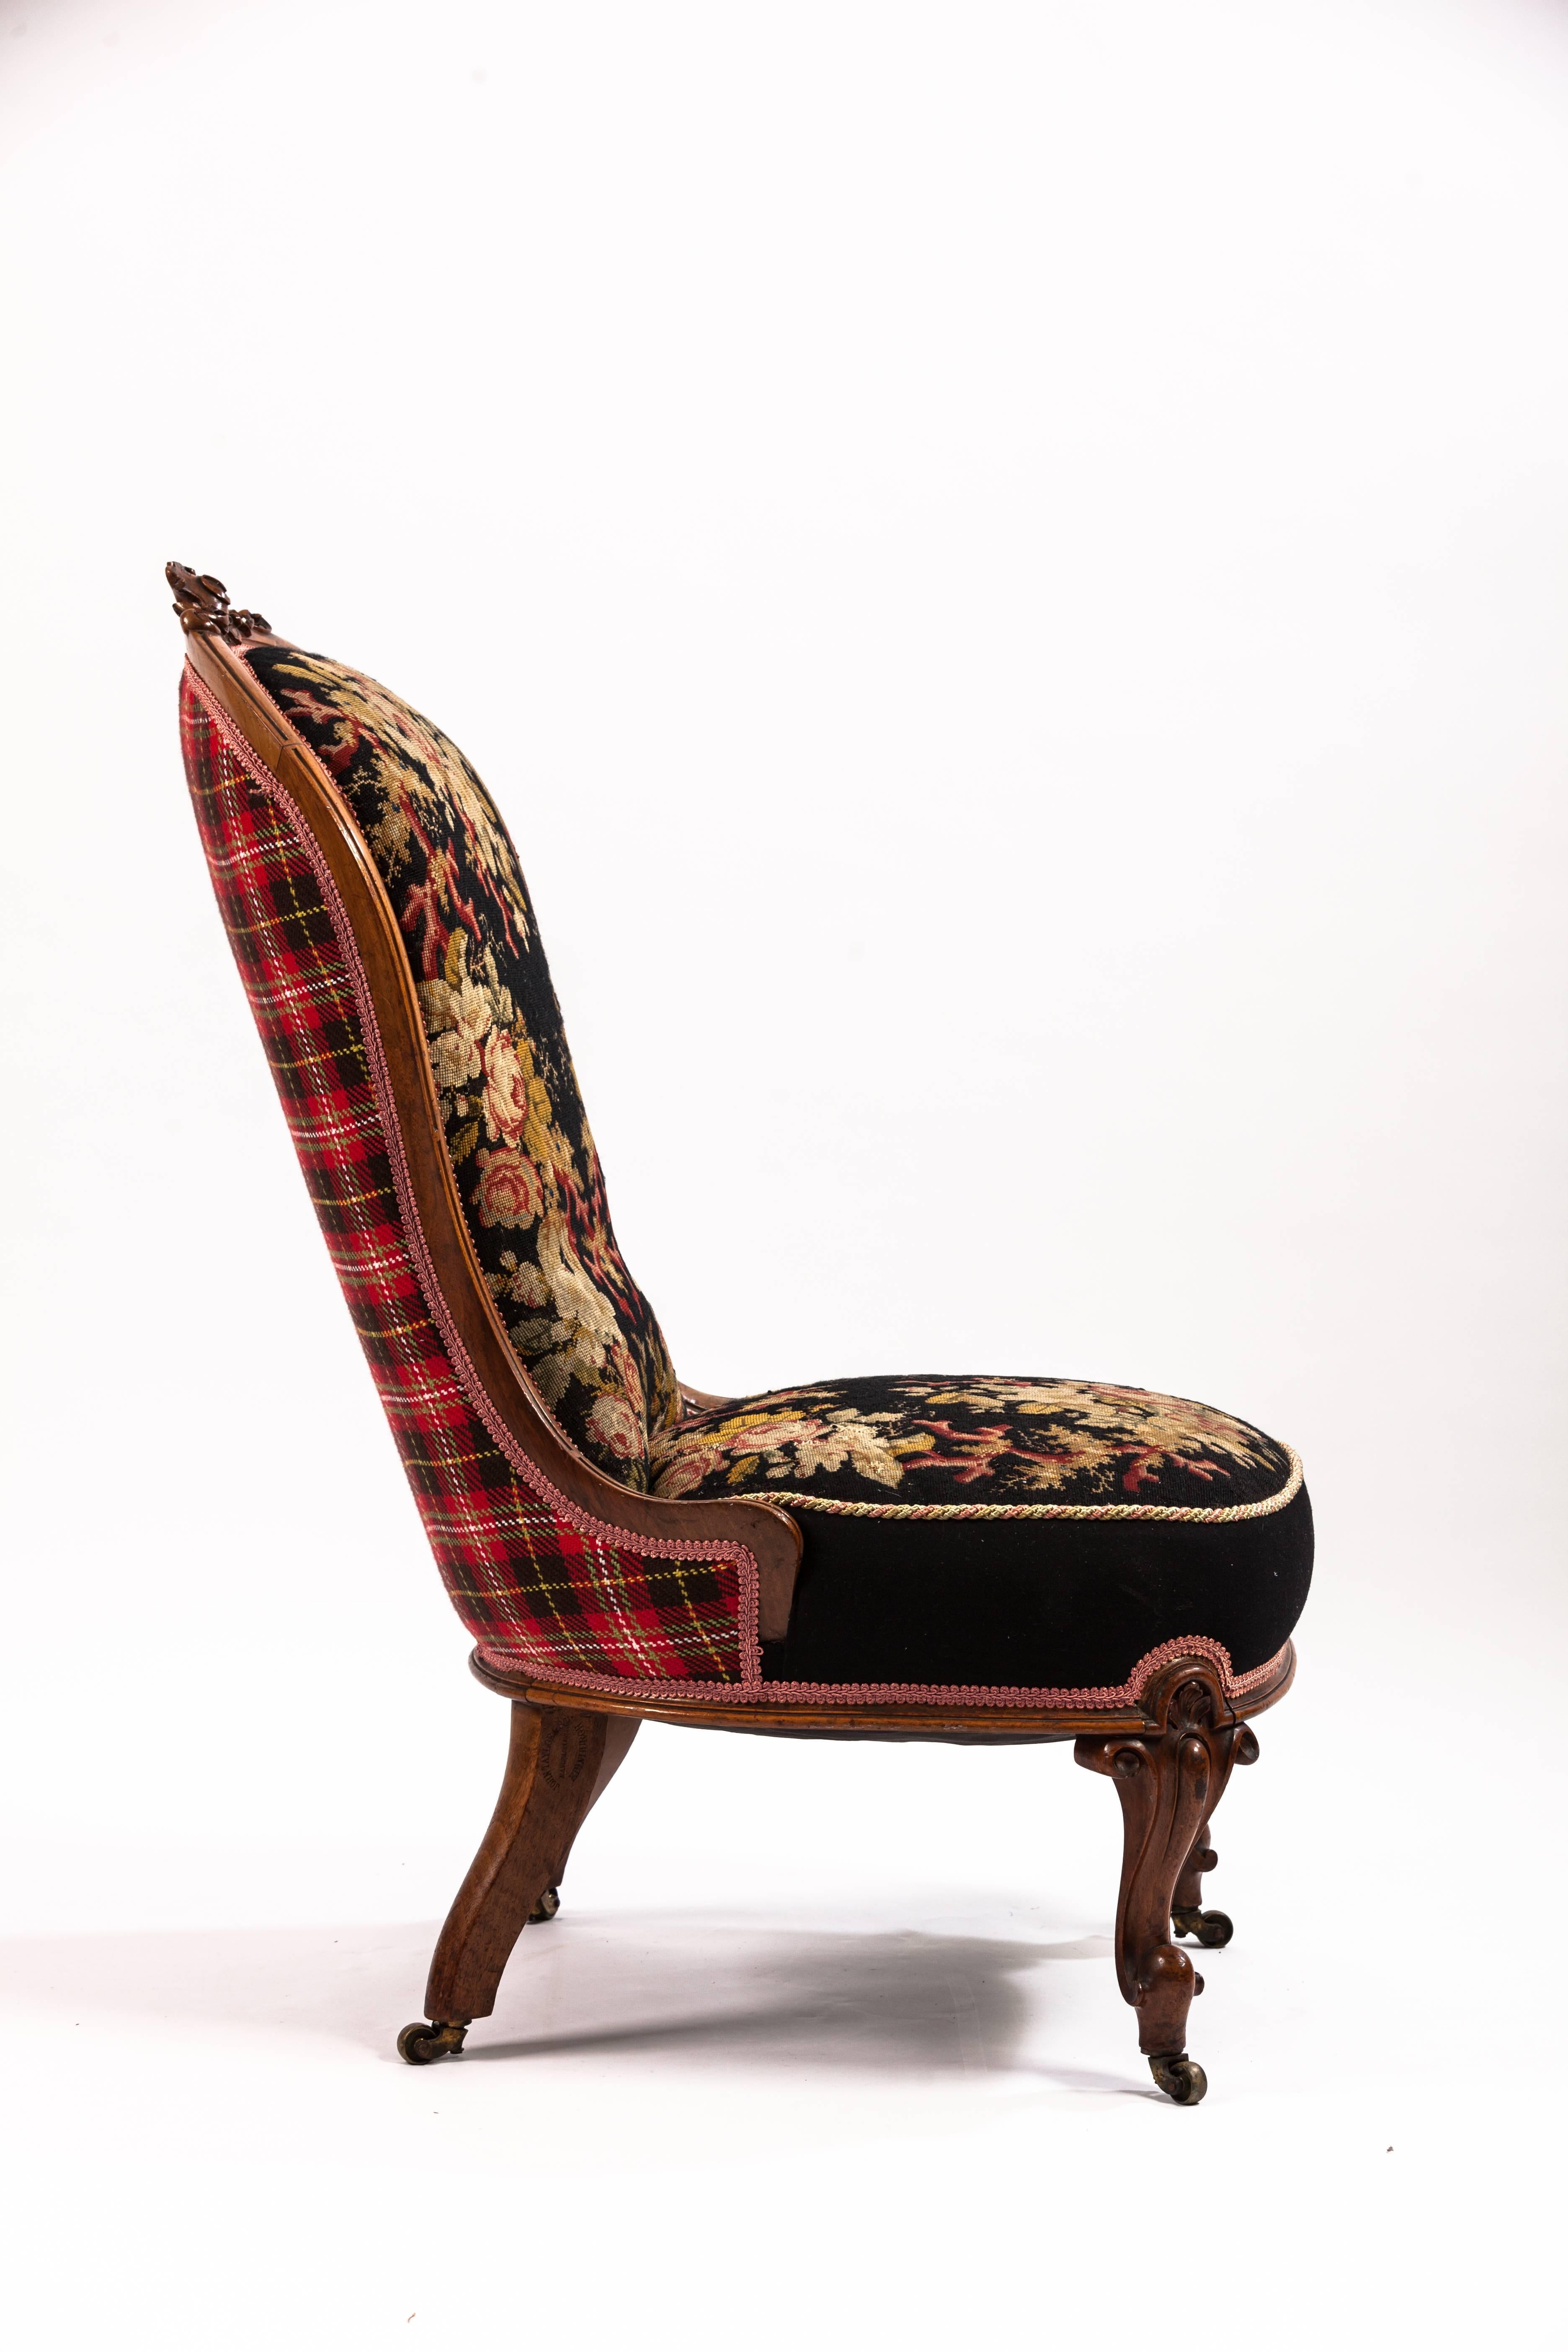 Embroidered 19th Century Needlepoint Upholstered English Slipper Chair For Sale